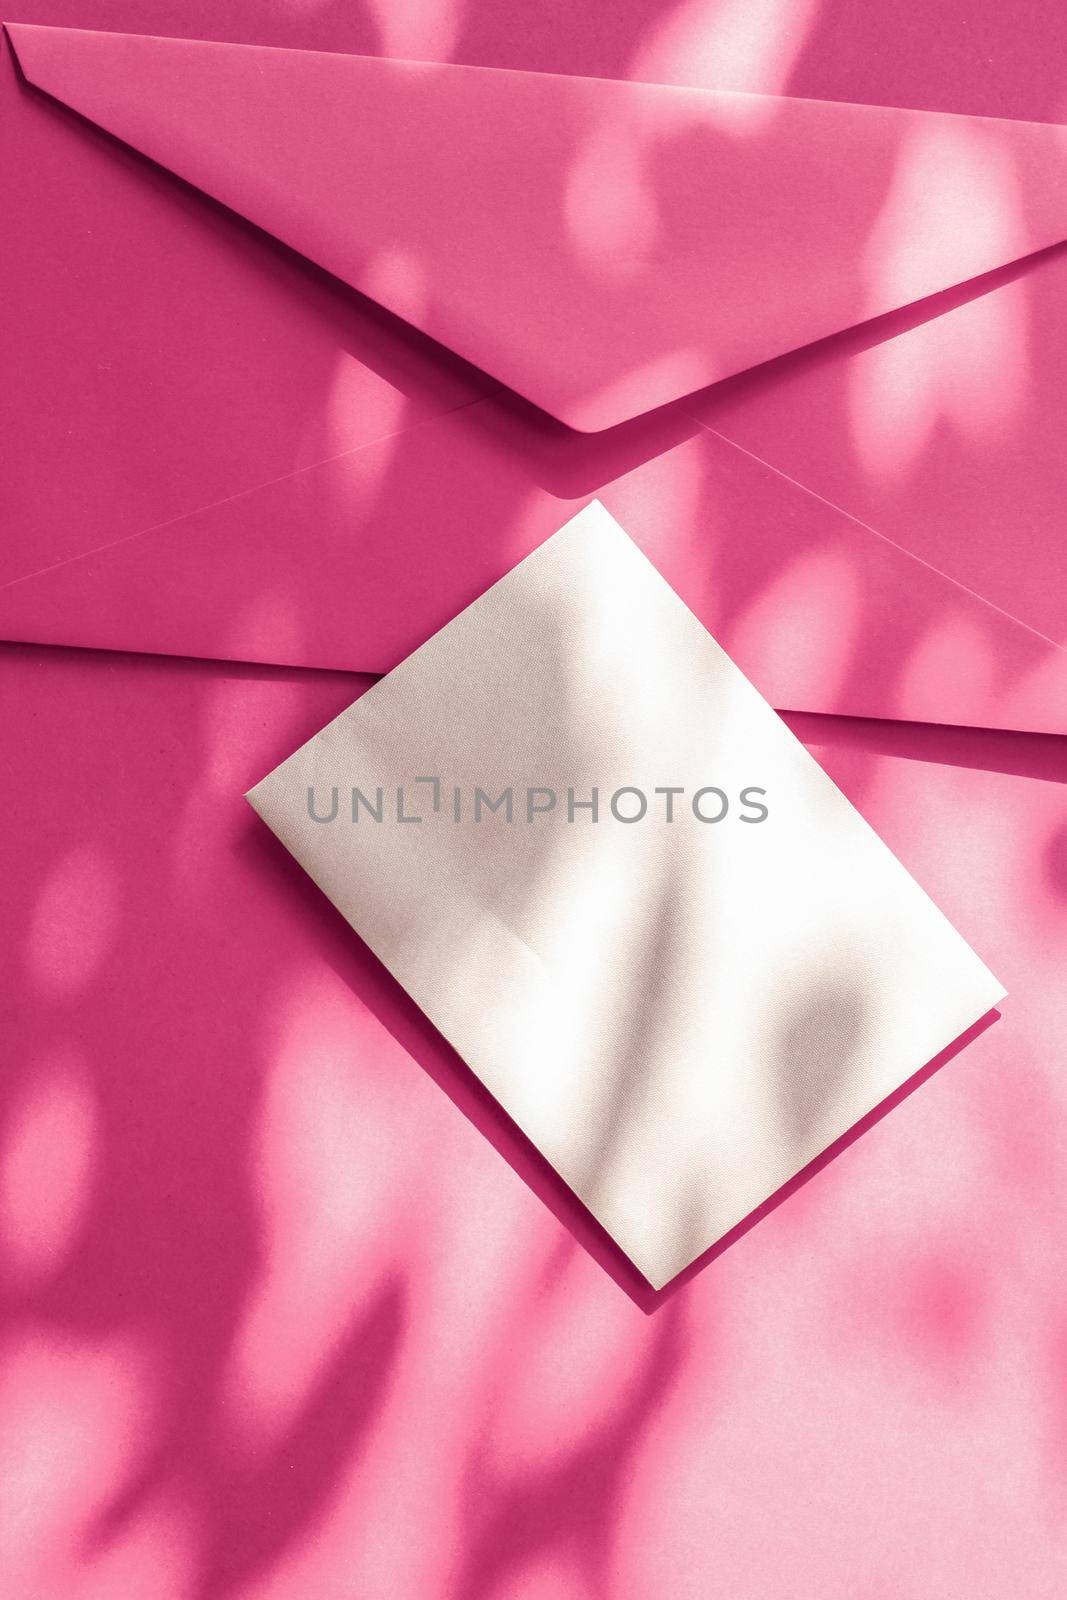 Beauty brand identity as flatlay mockup design, business card and letter for online luxury branding on pink shadow background by Anneleven